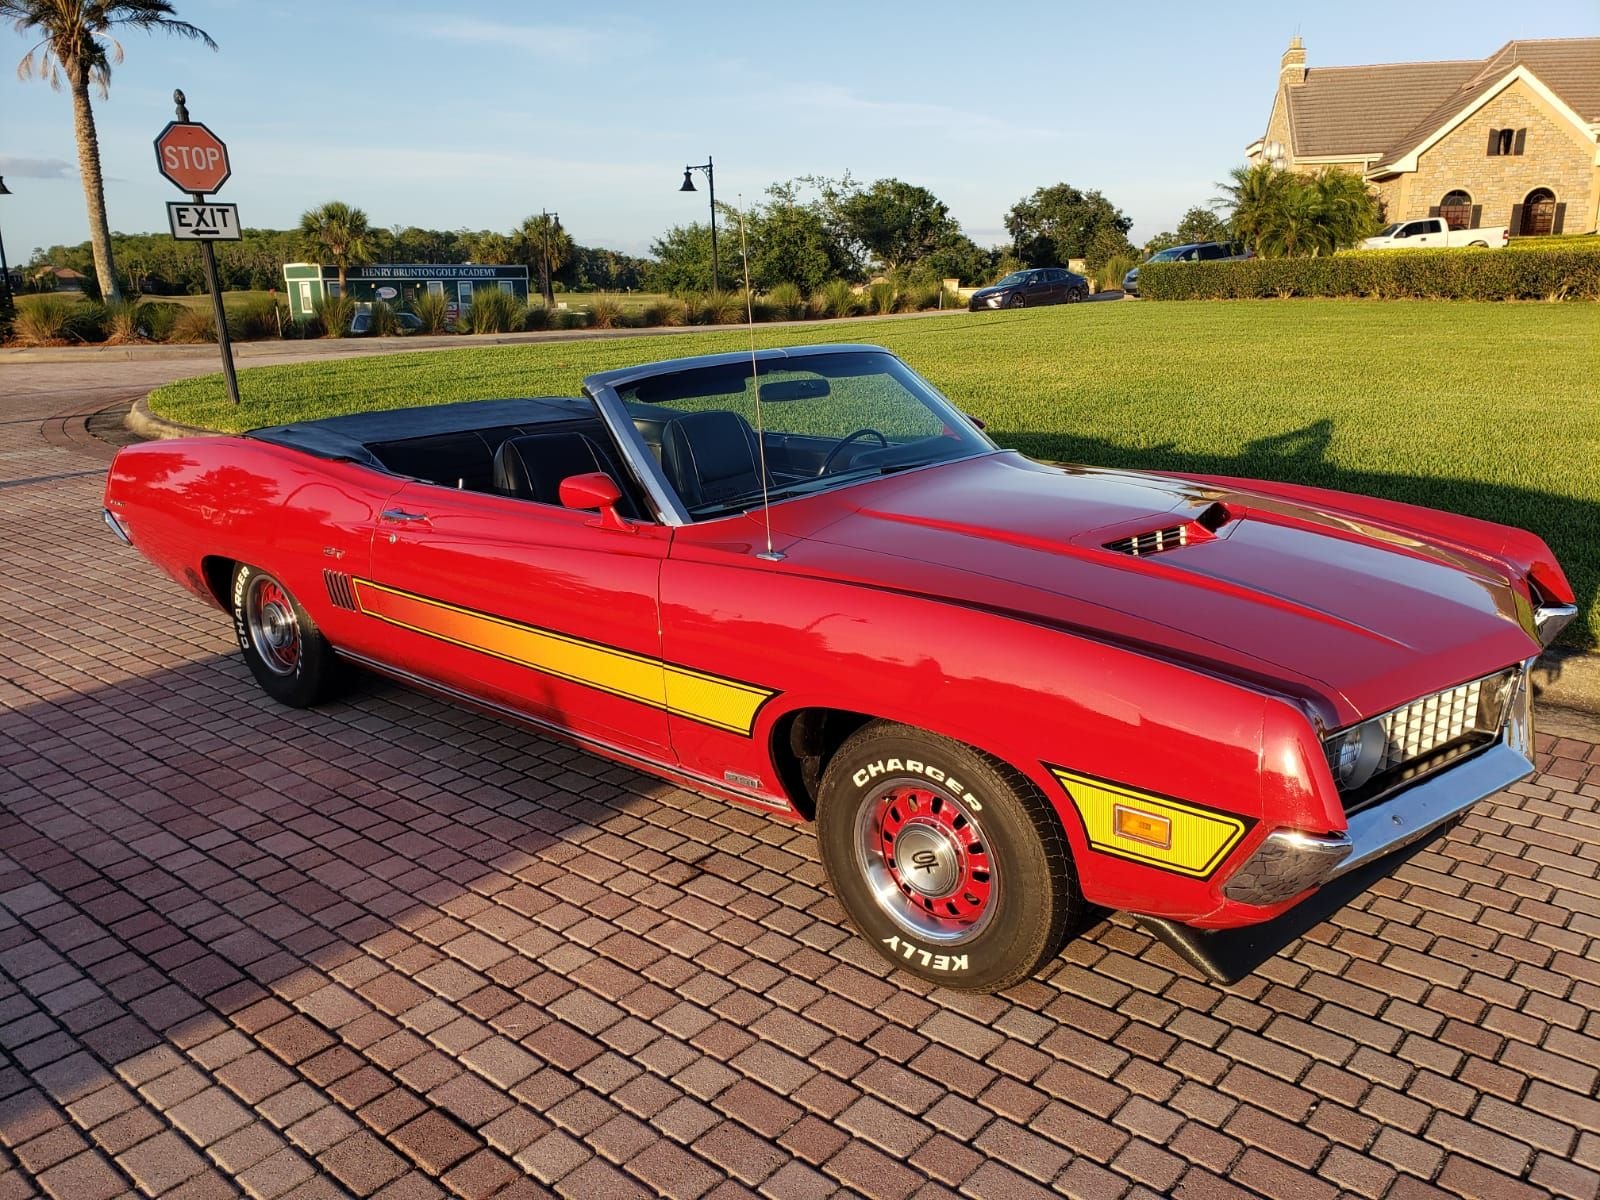 1970 ford torino gt convertible